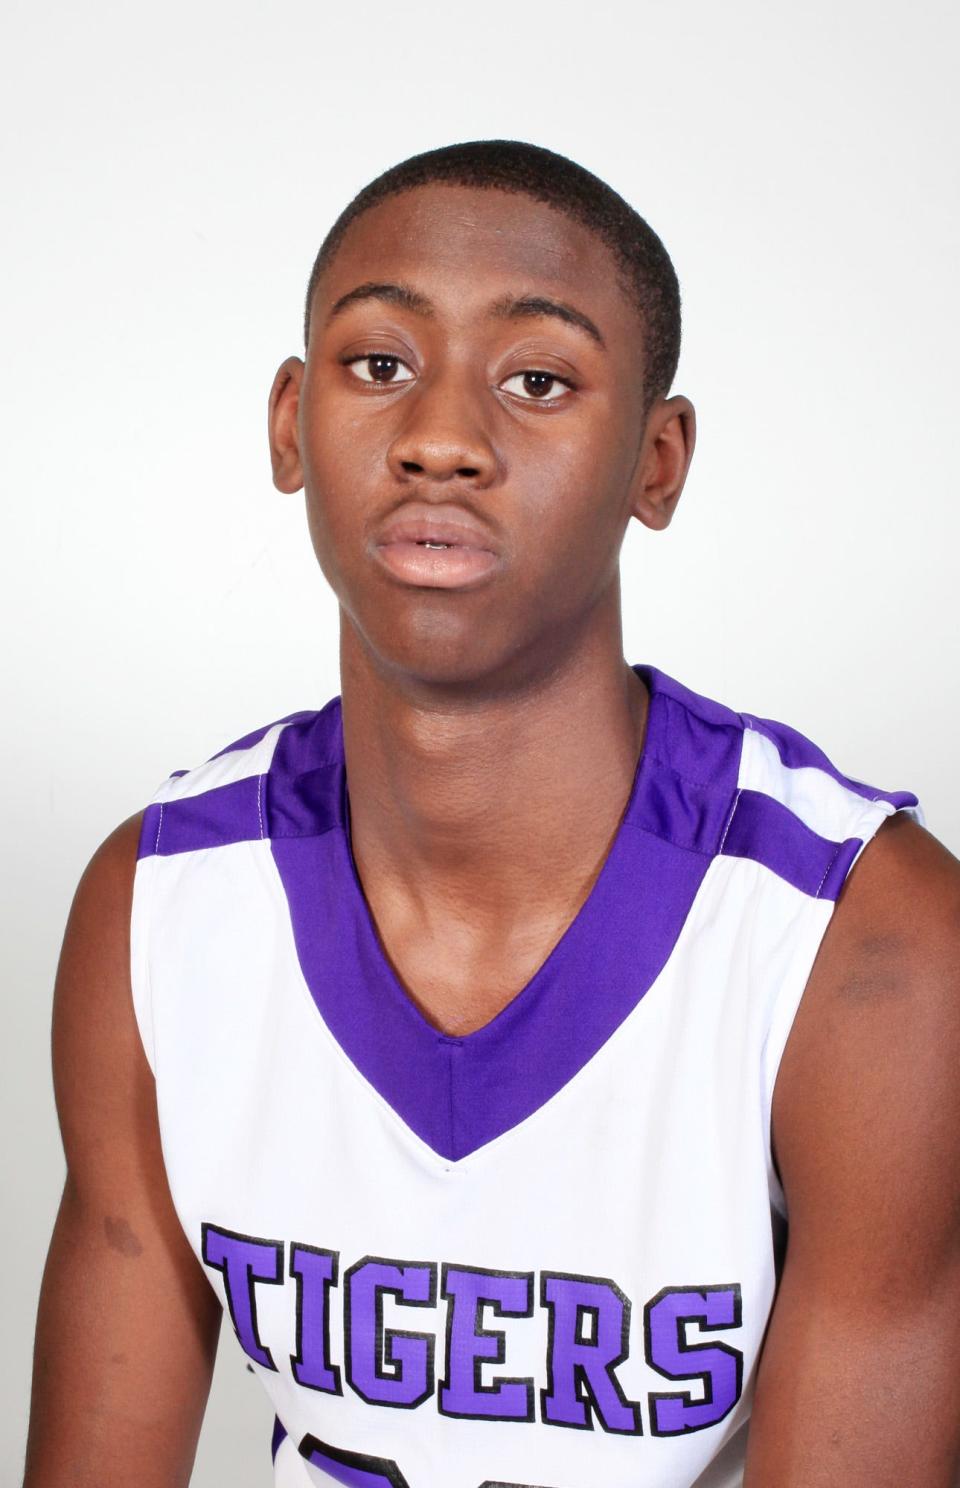 Pickerington Central's Caris LeVert (CQ), who is a member of the Dispatch All-Metro boys basketball team, was photographed March 19, 2012. (Columbus Dispatch photo by Fred Squillante)